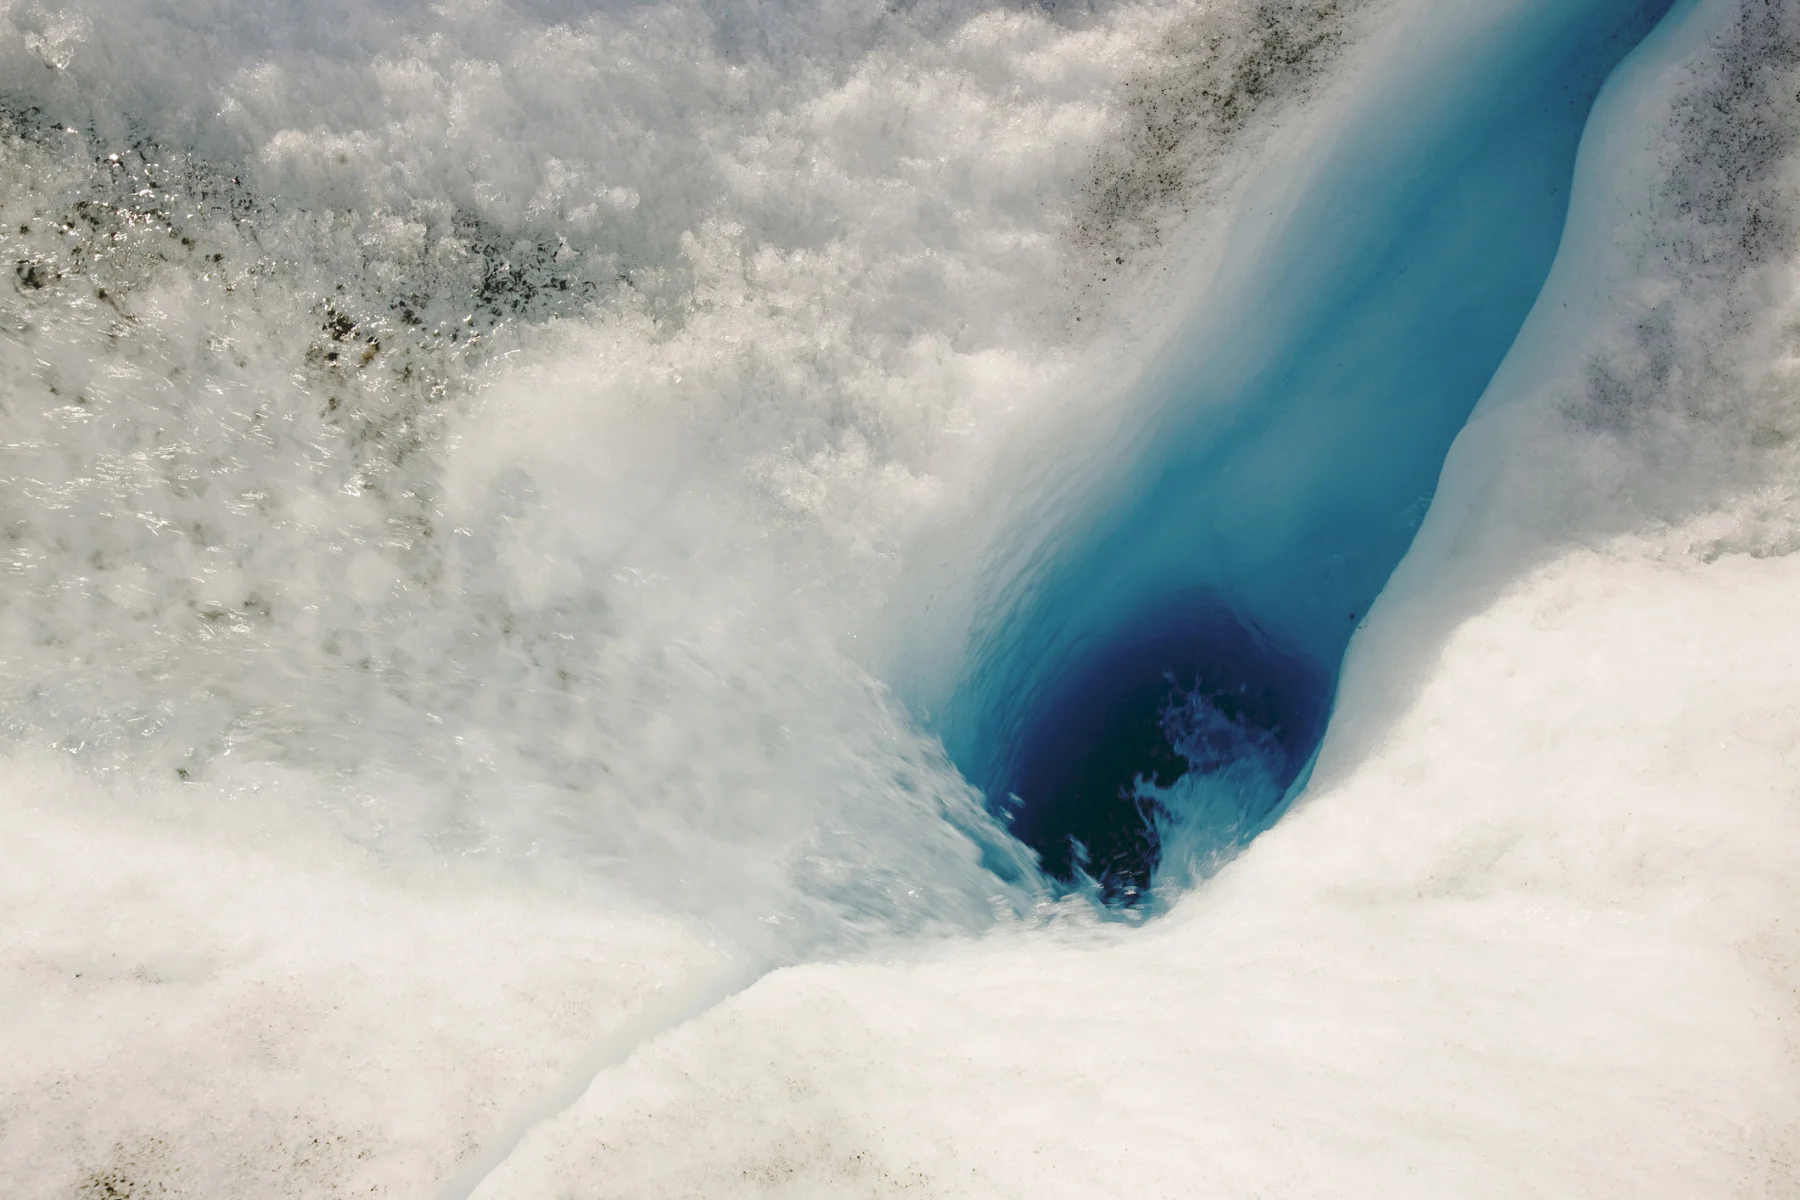 meltwater greenland  (Ashley Cooper. The Image Bank. Getty Images)